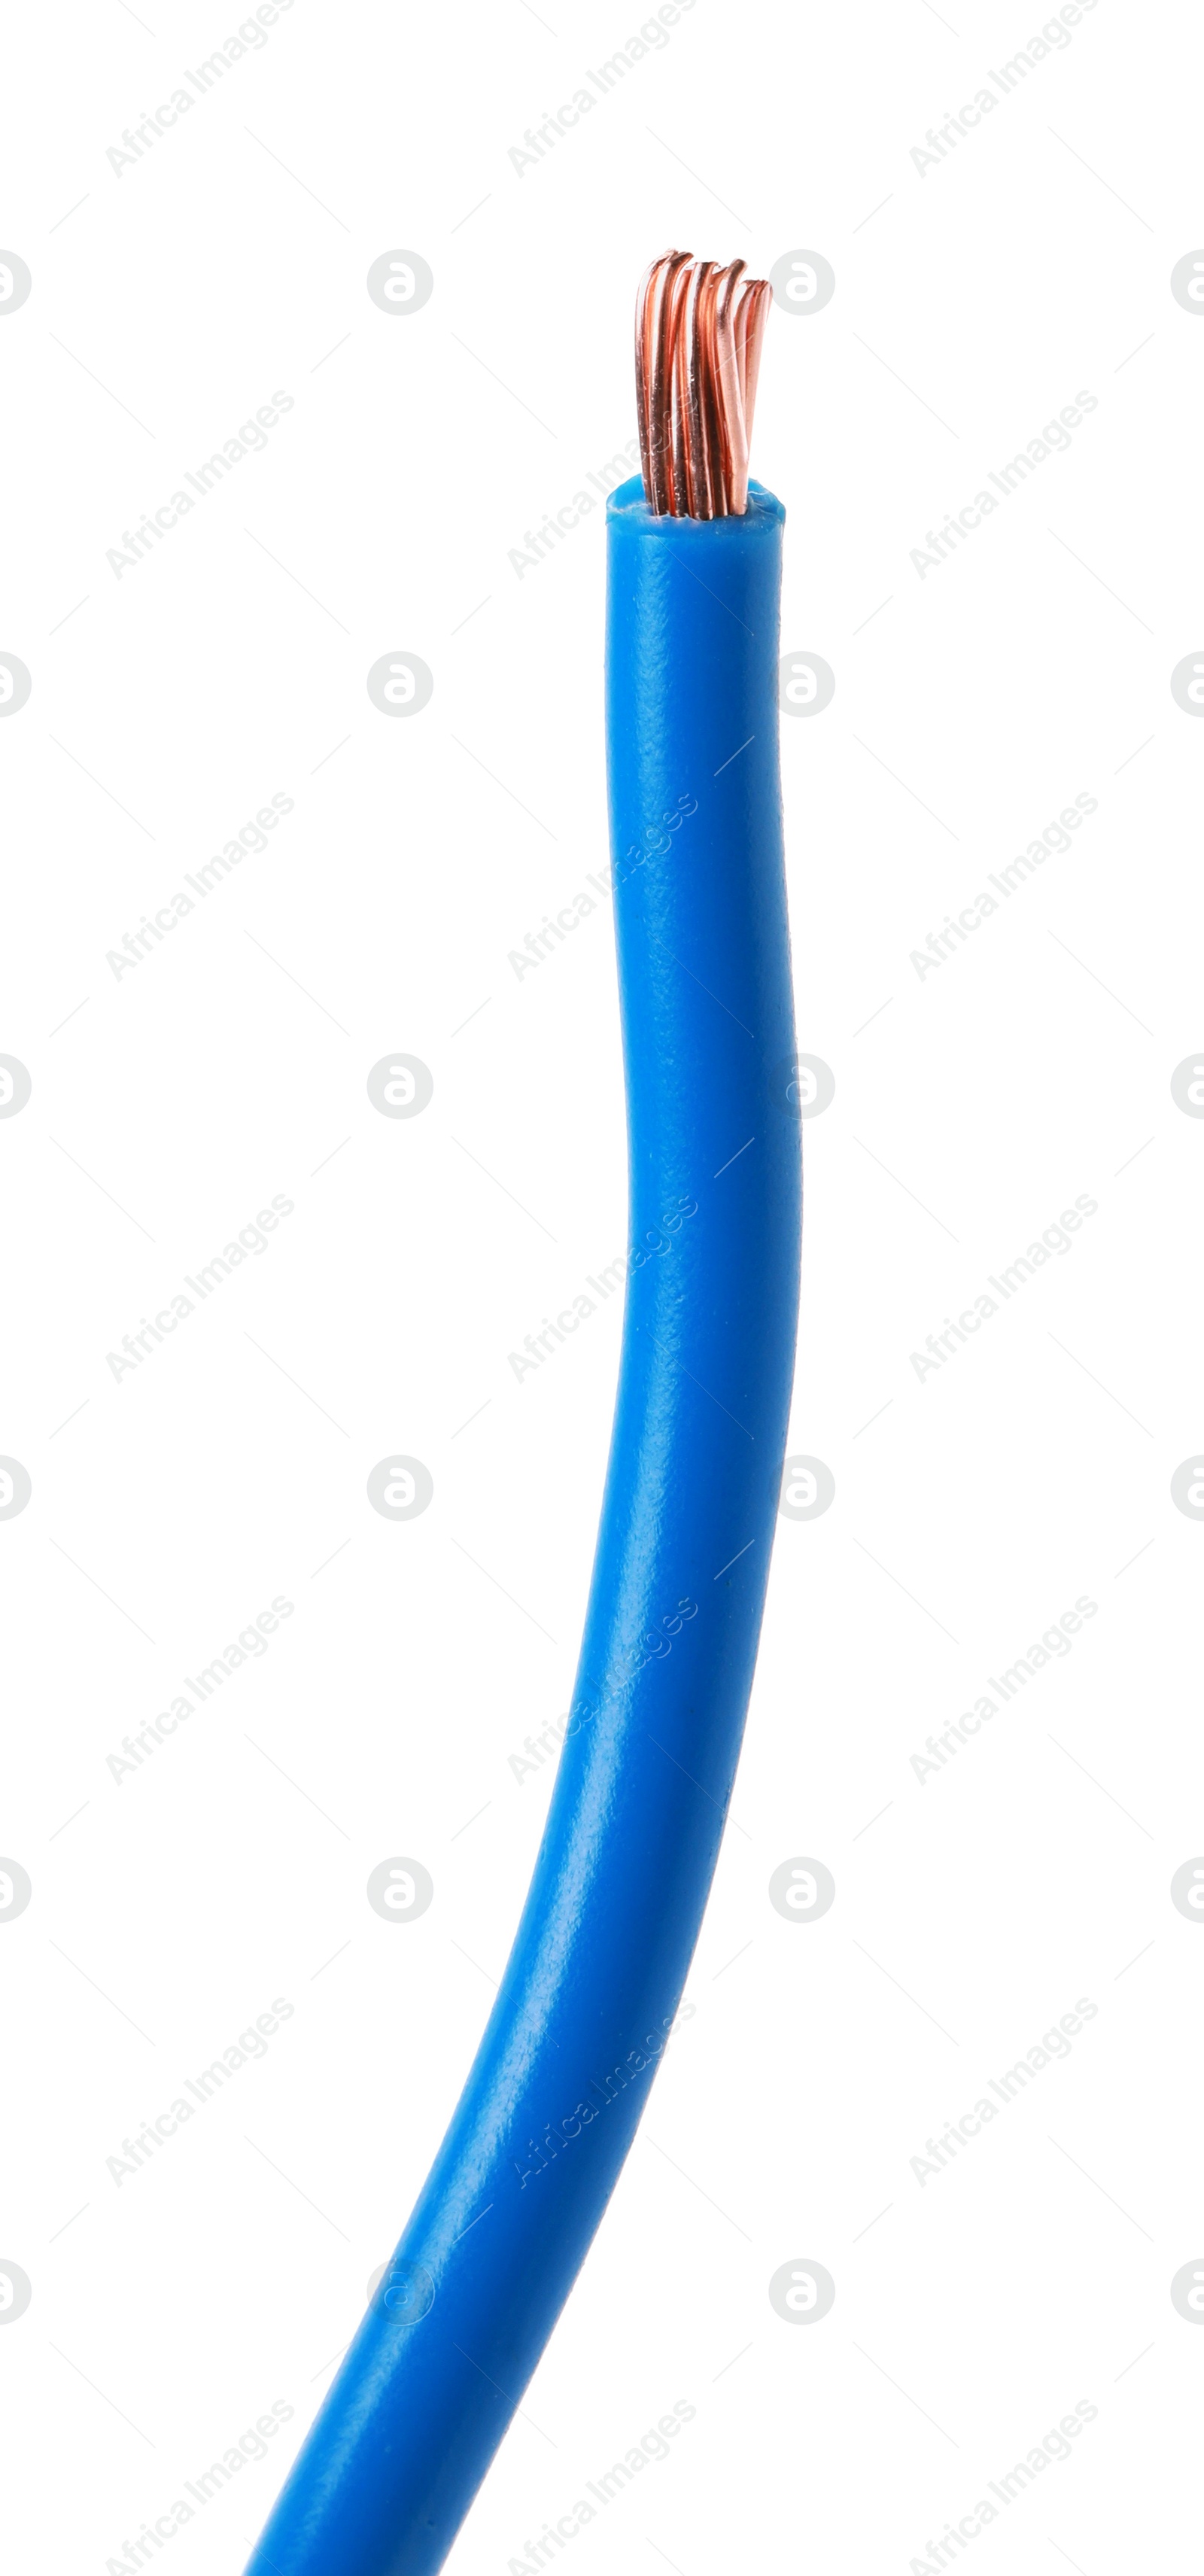 Photo of One new electrical wire isolated on white